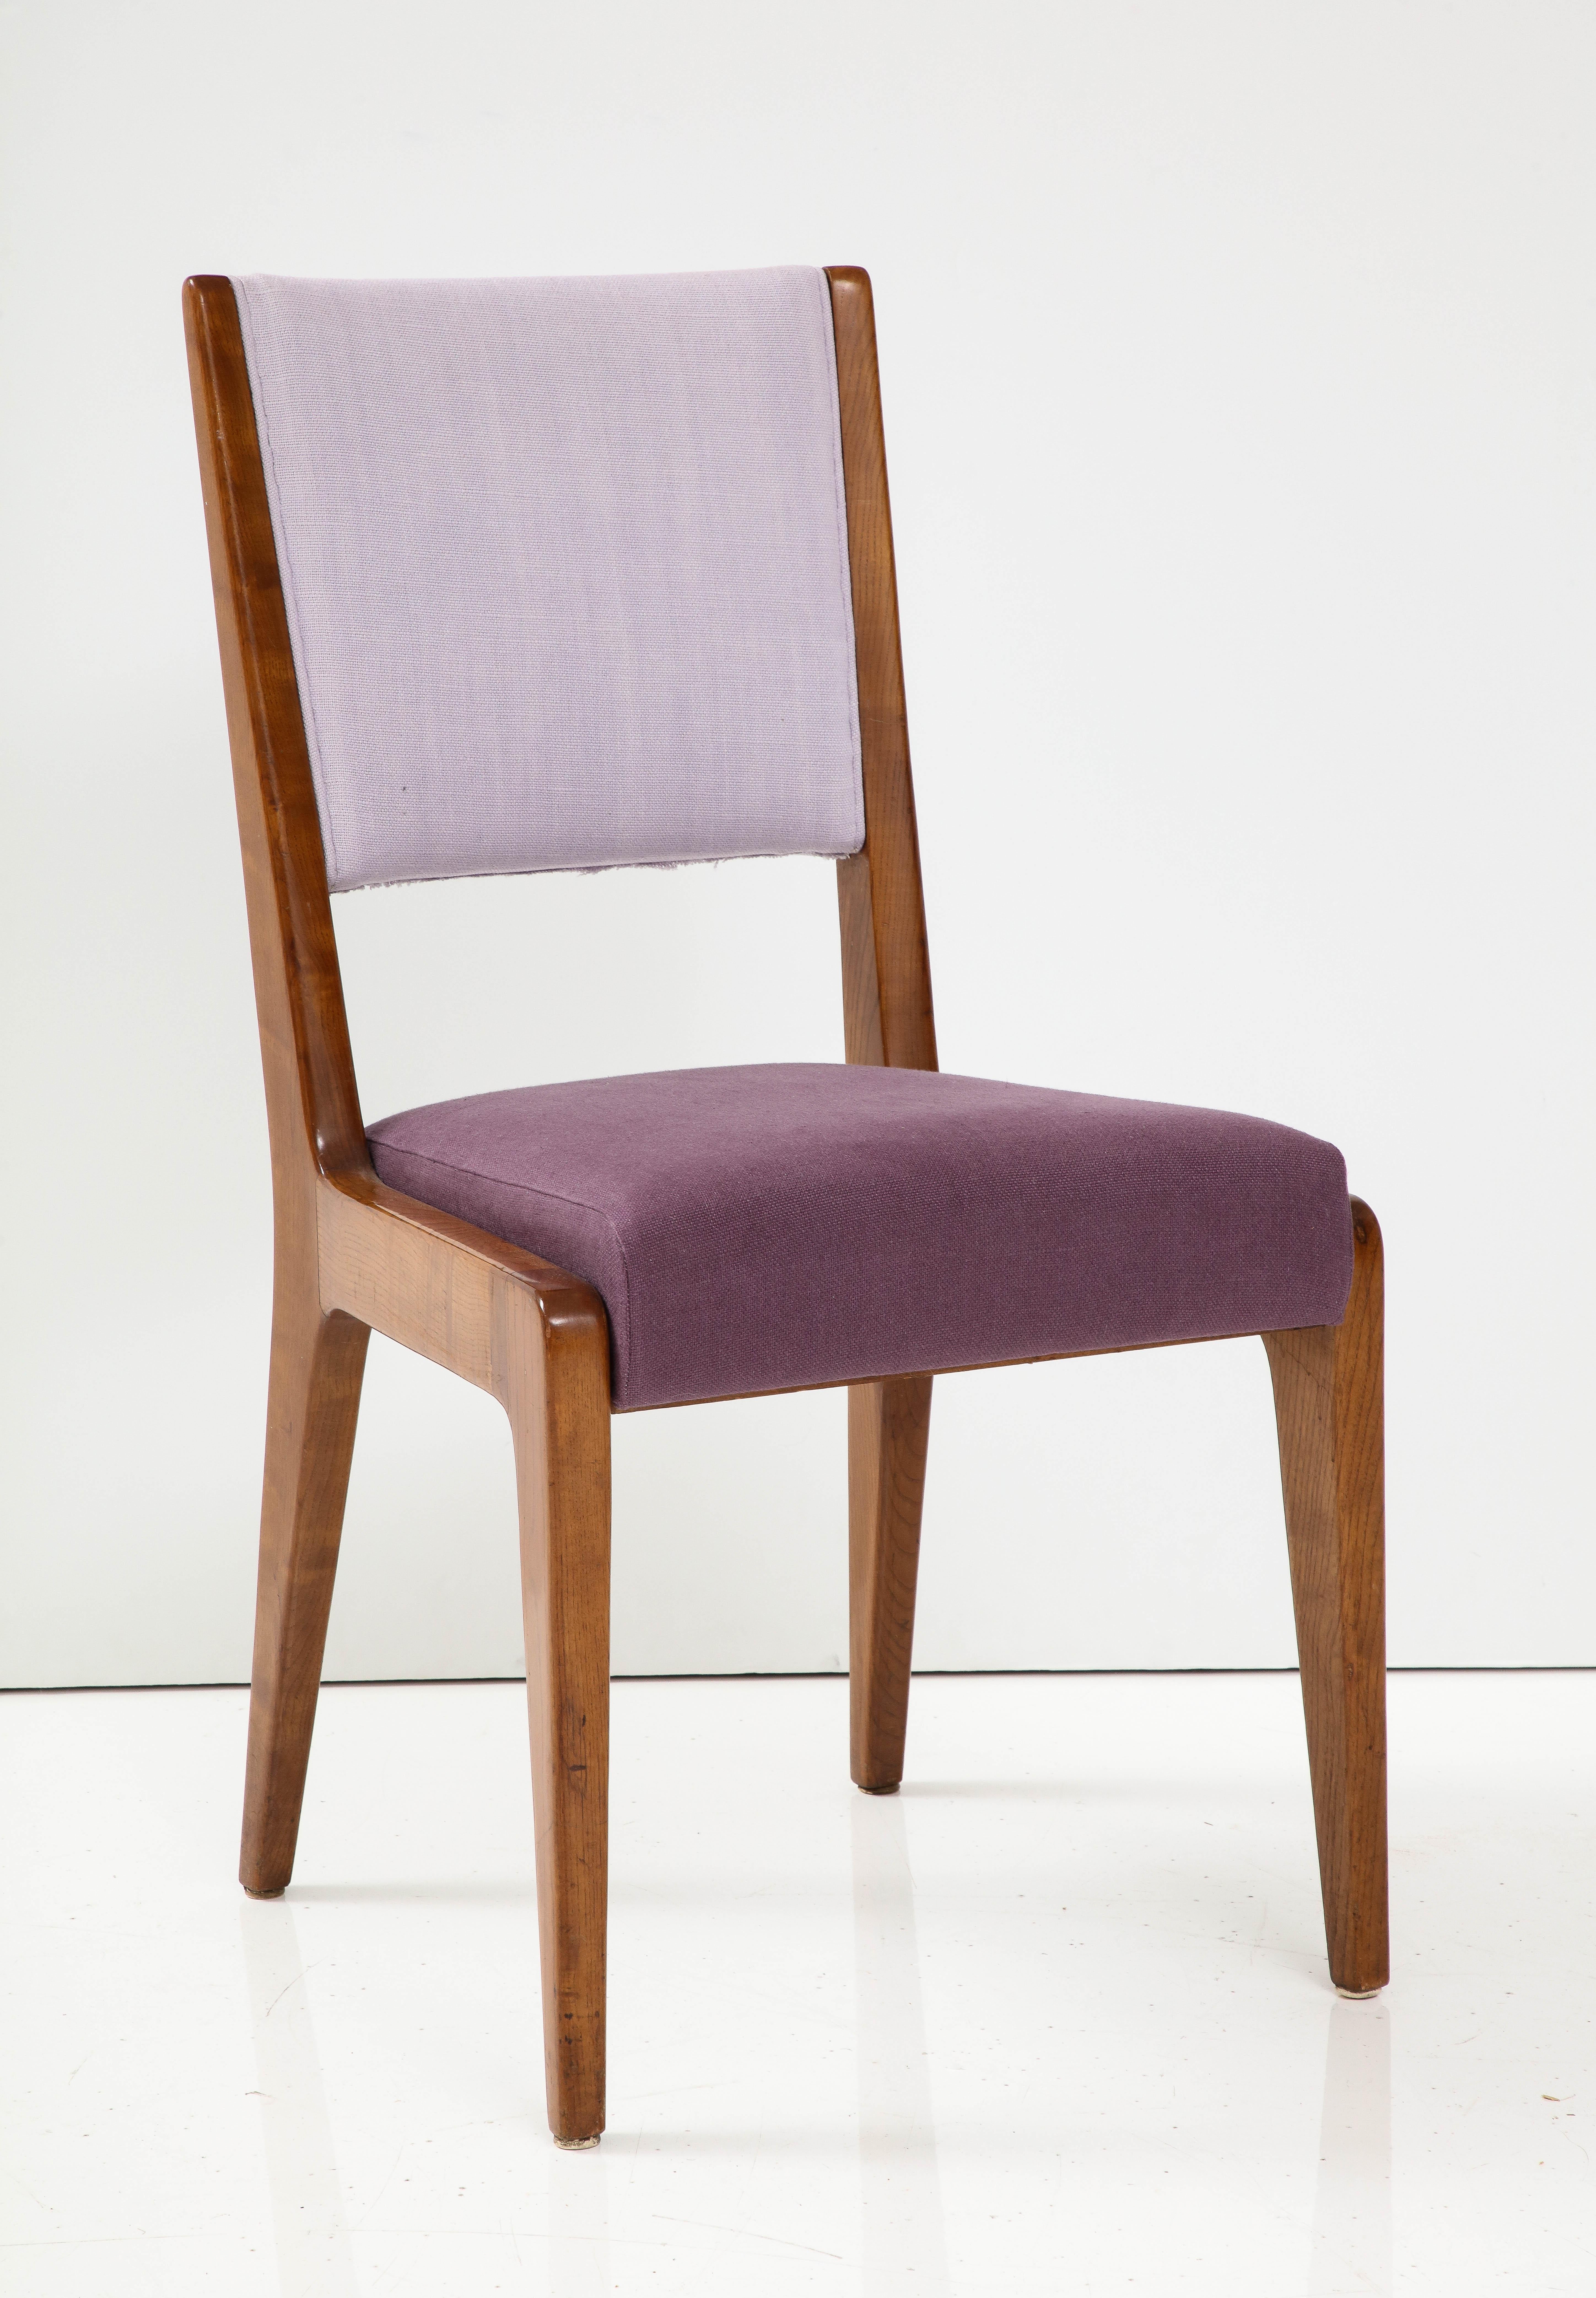 Linen Upholstered Oak Chair by Gio Ponti, Italy, circa. 1950s For Sale 1